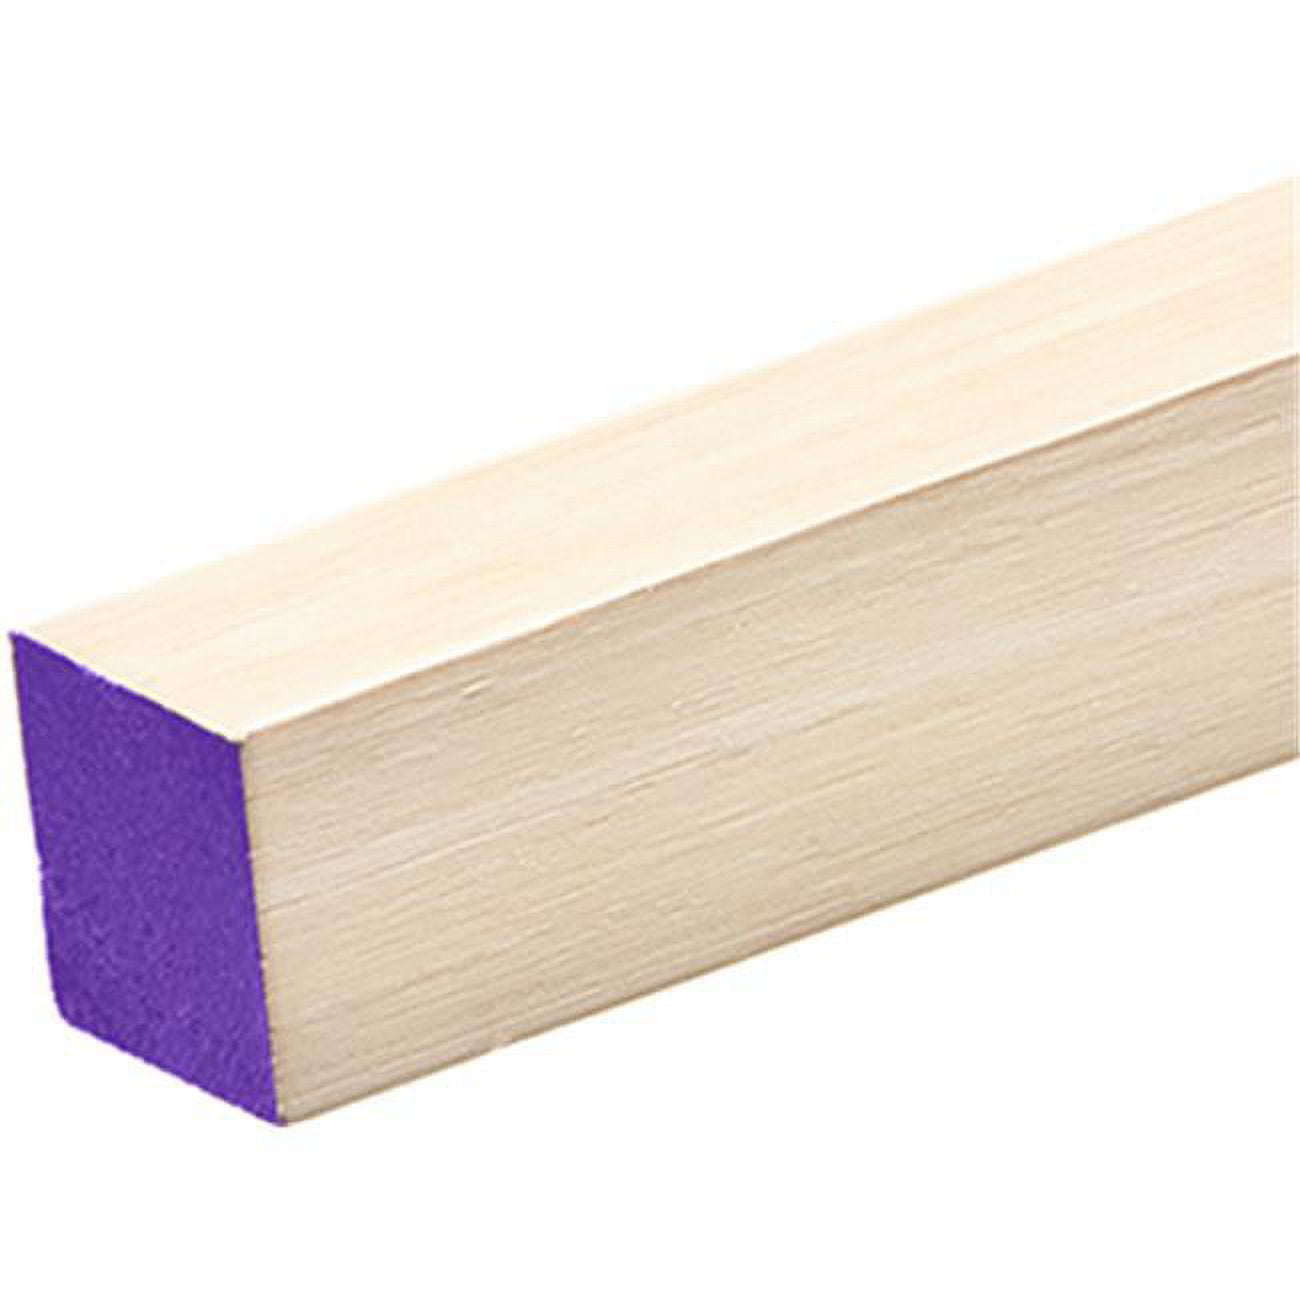 Picture of Craftwood 12126 0.5 x 36 in. Square Wood Dowel - Pack of 49